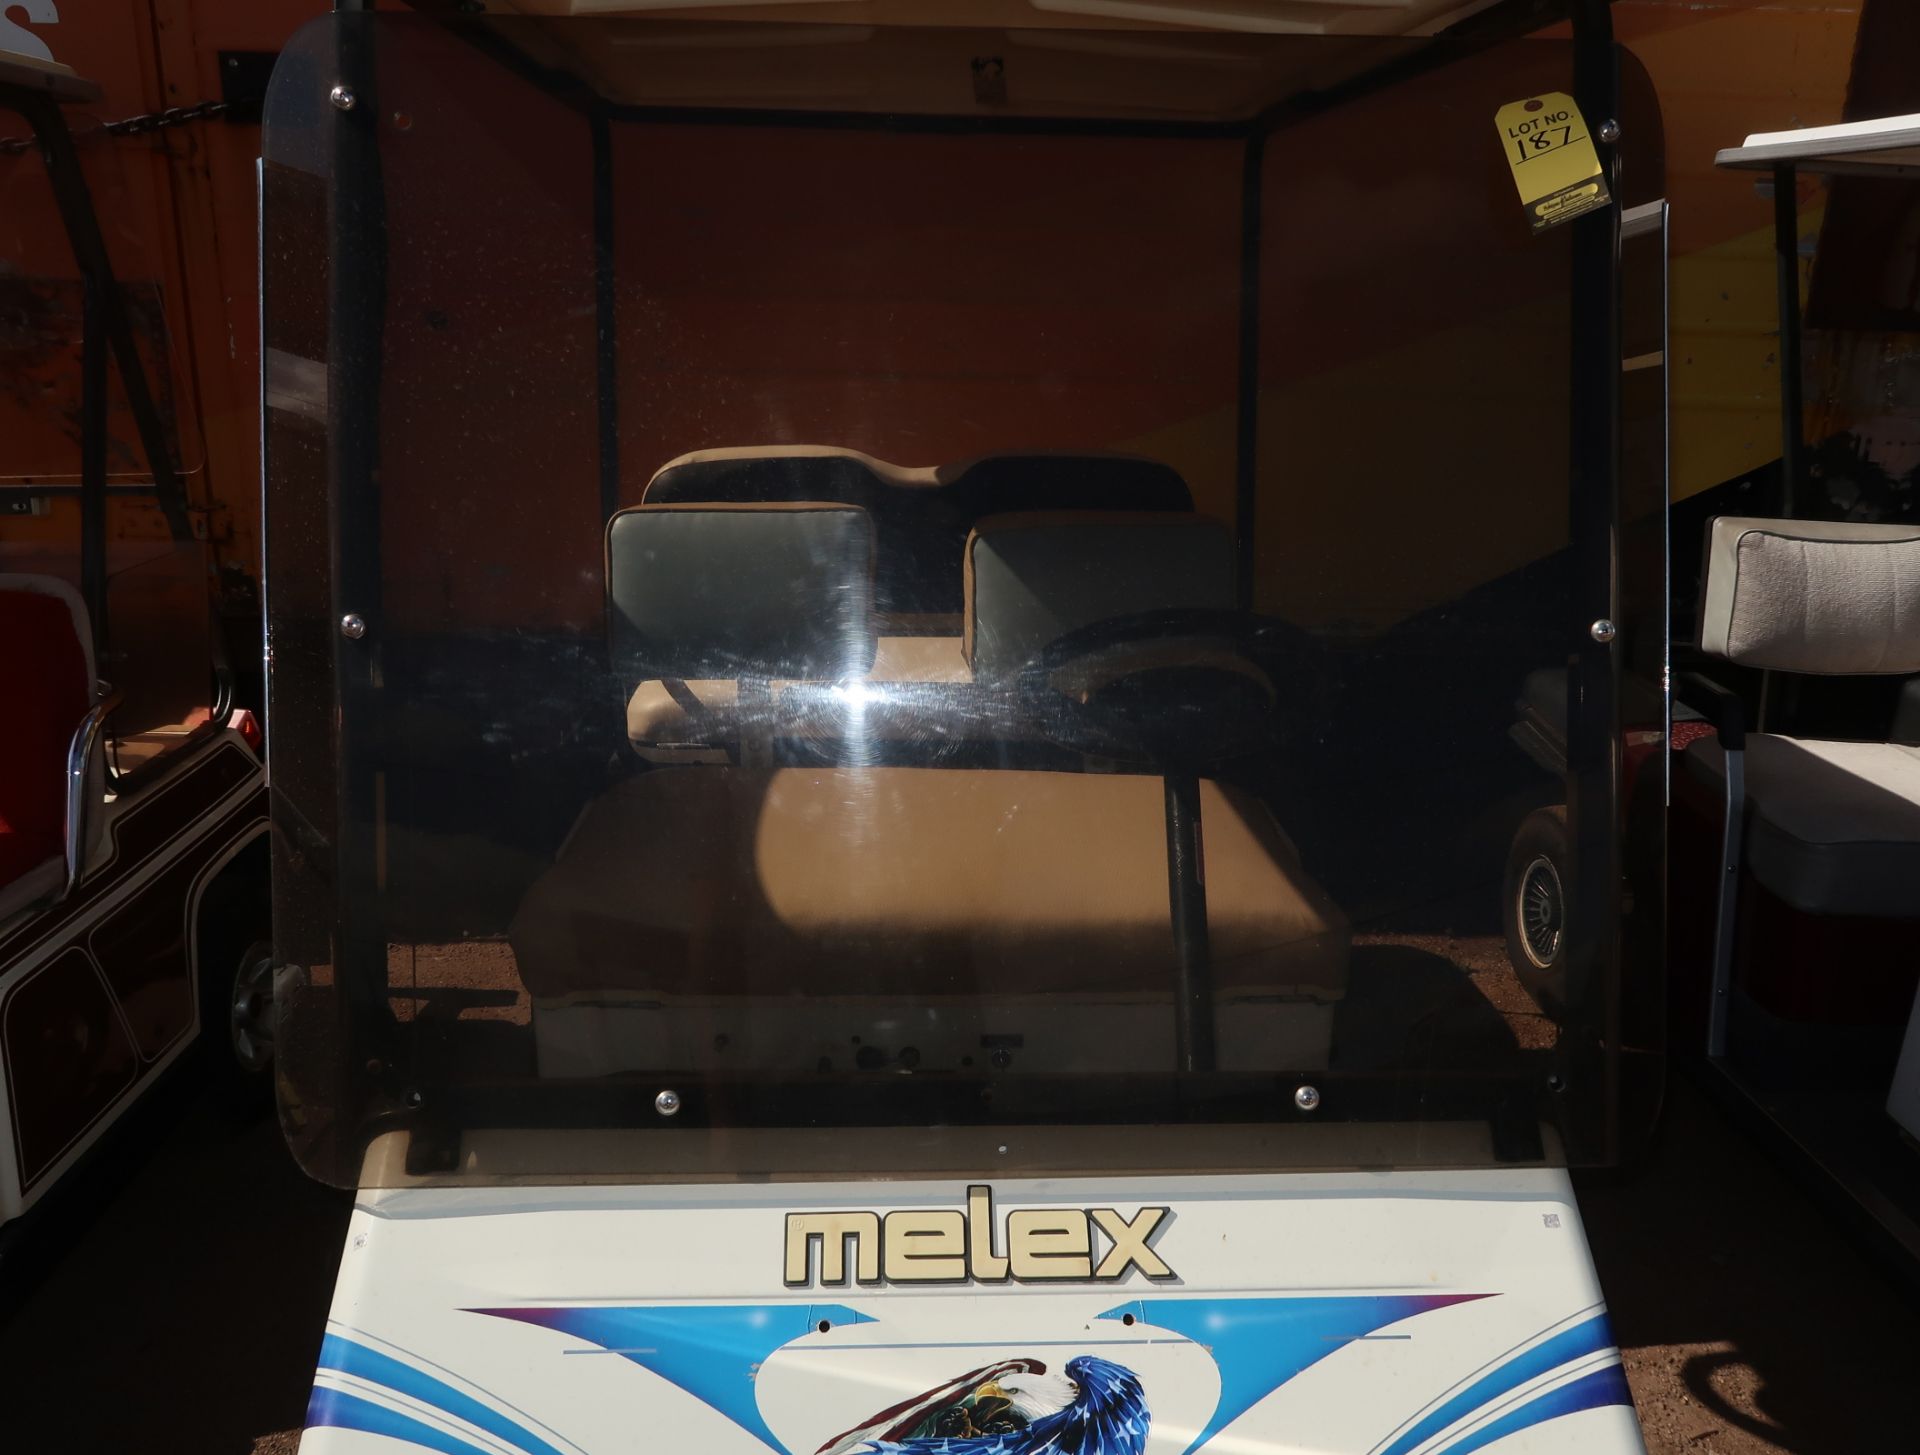 MELEX GOLFCART W/ CHARGER & BATTERIES, REAR SEAT MDL. 252 SN. 191992 (NO TITLE) - Image 10 of 10